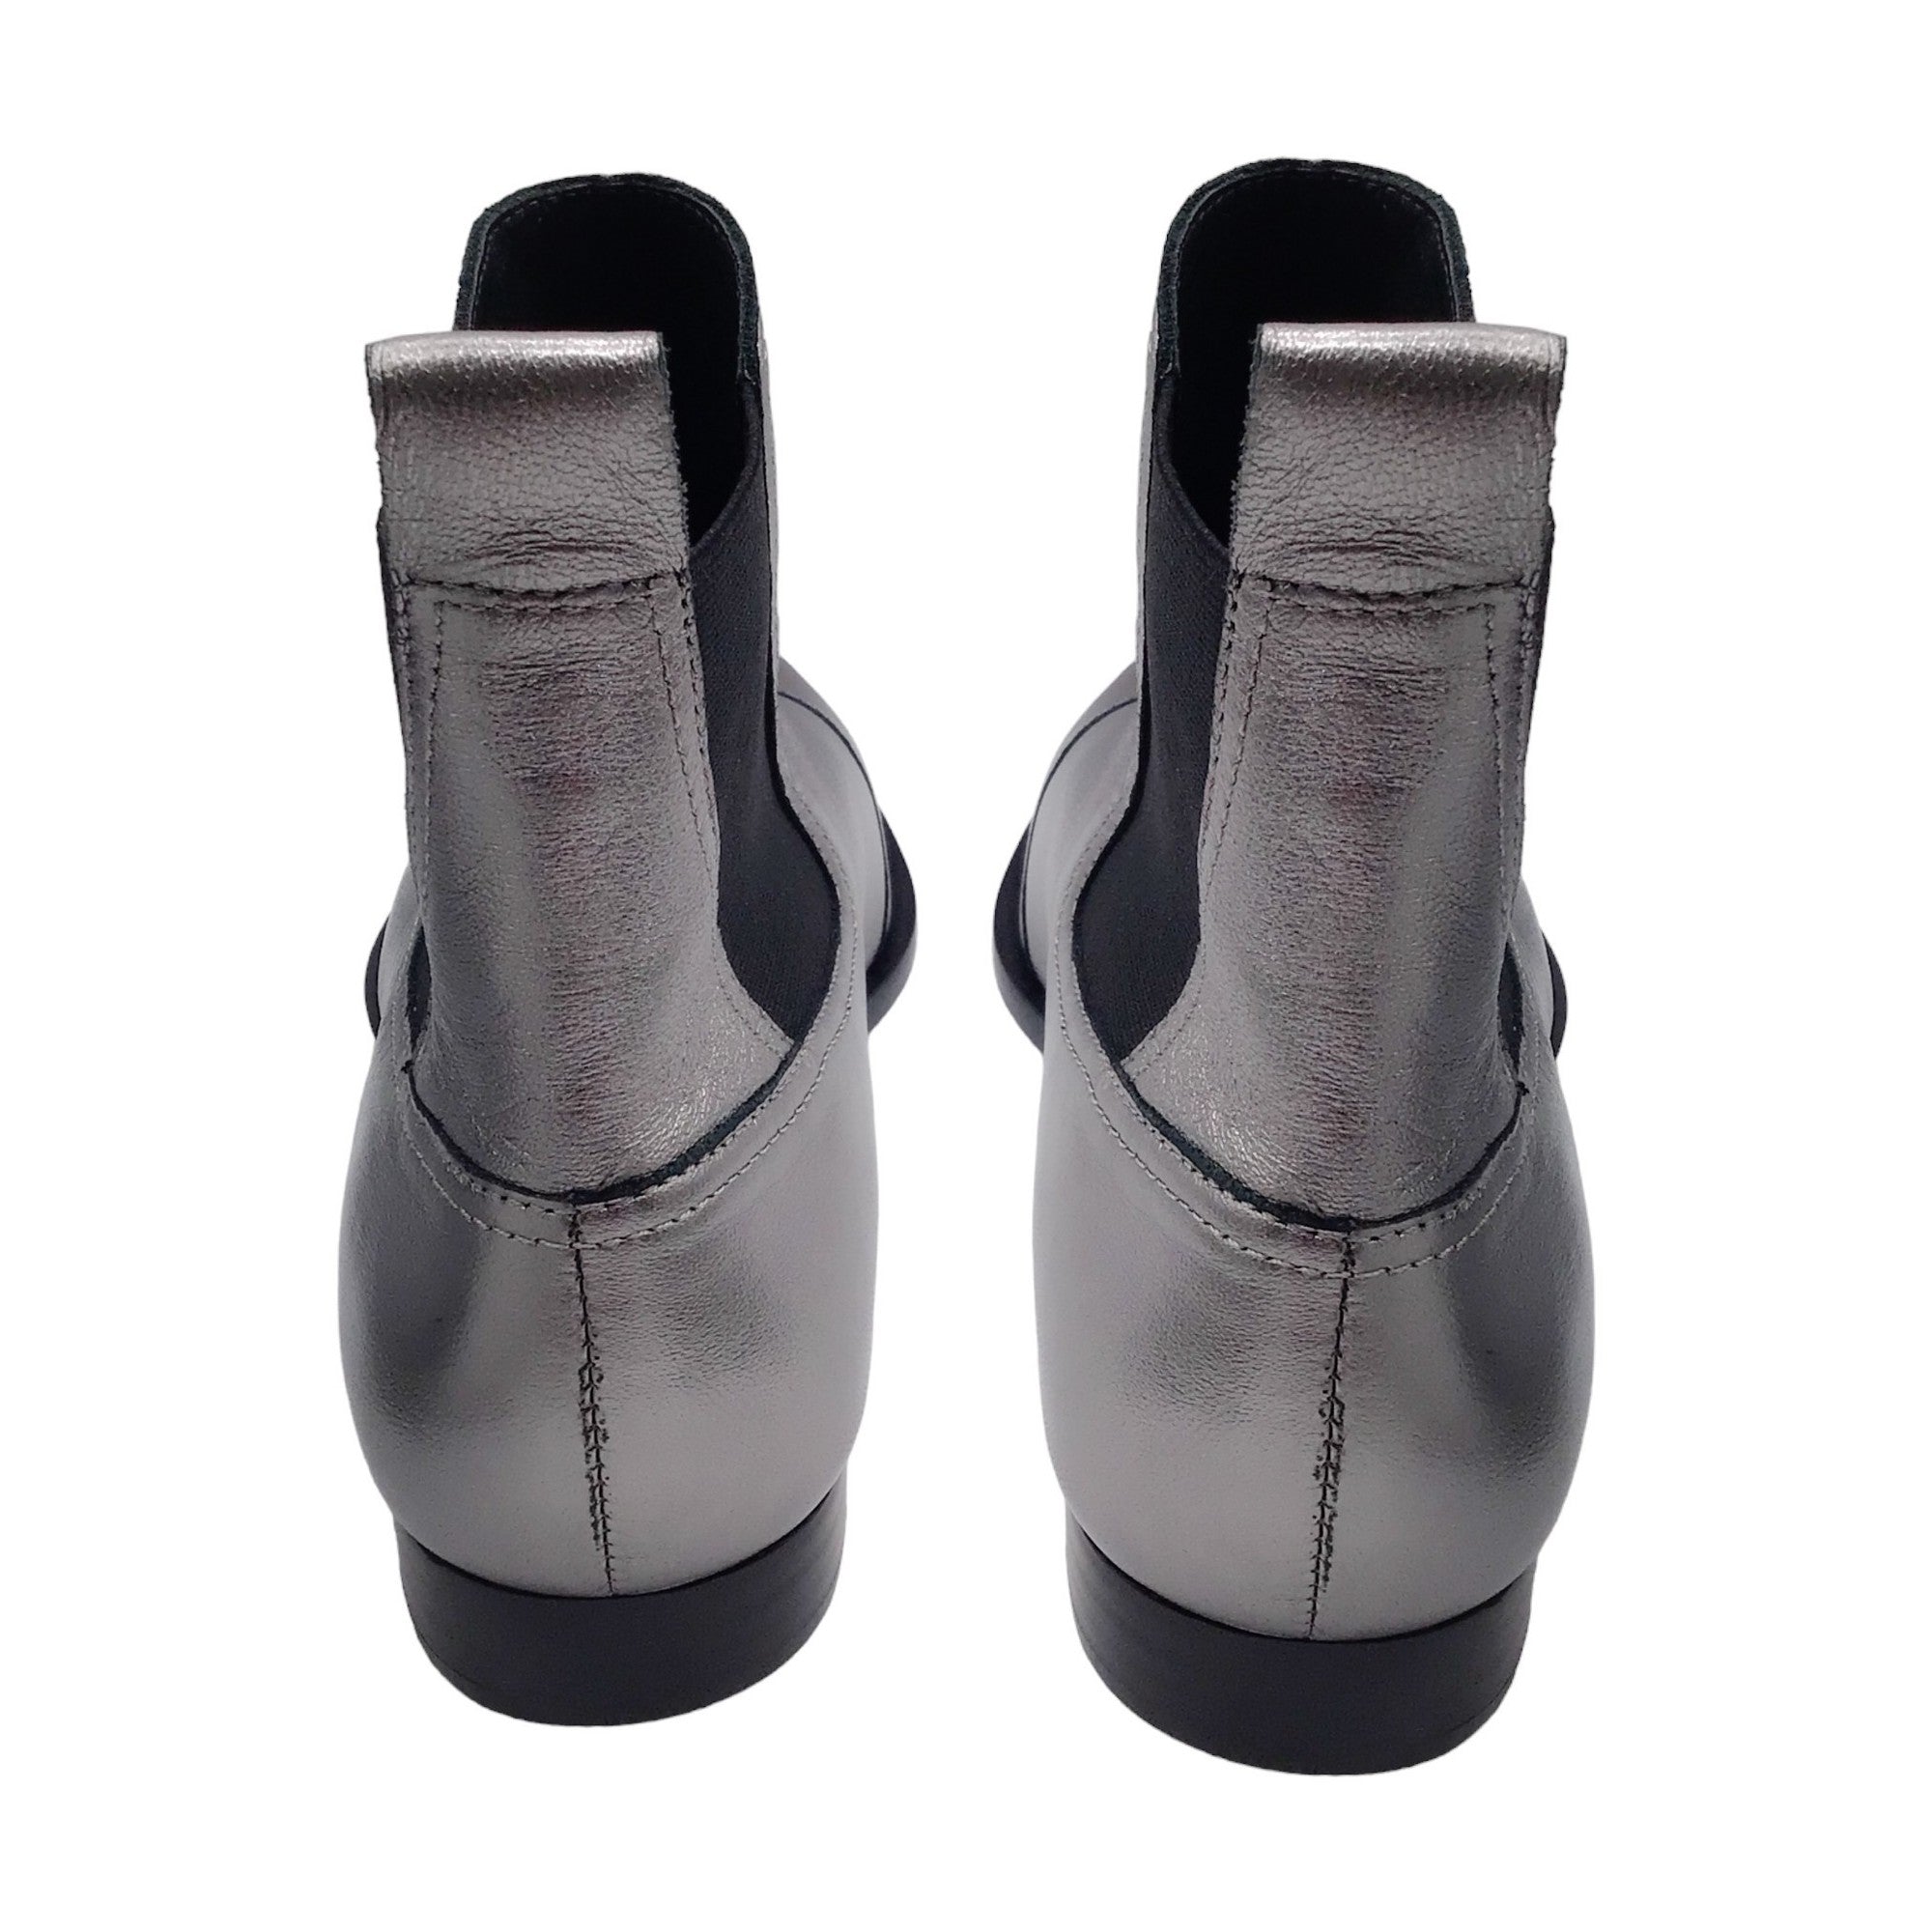 Rag & Bone Silver Metallic Pull-On Leather Ankle Boots